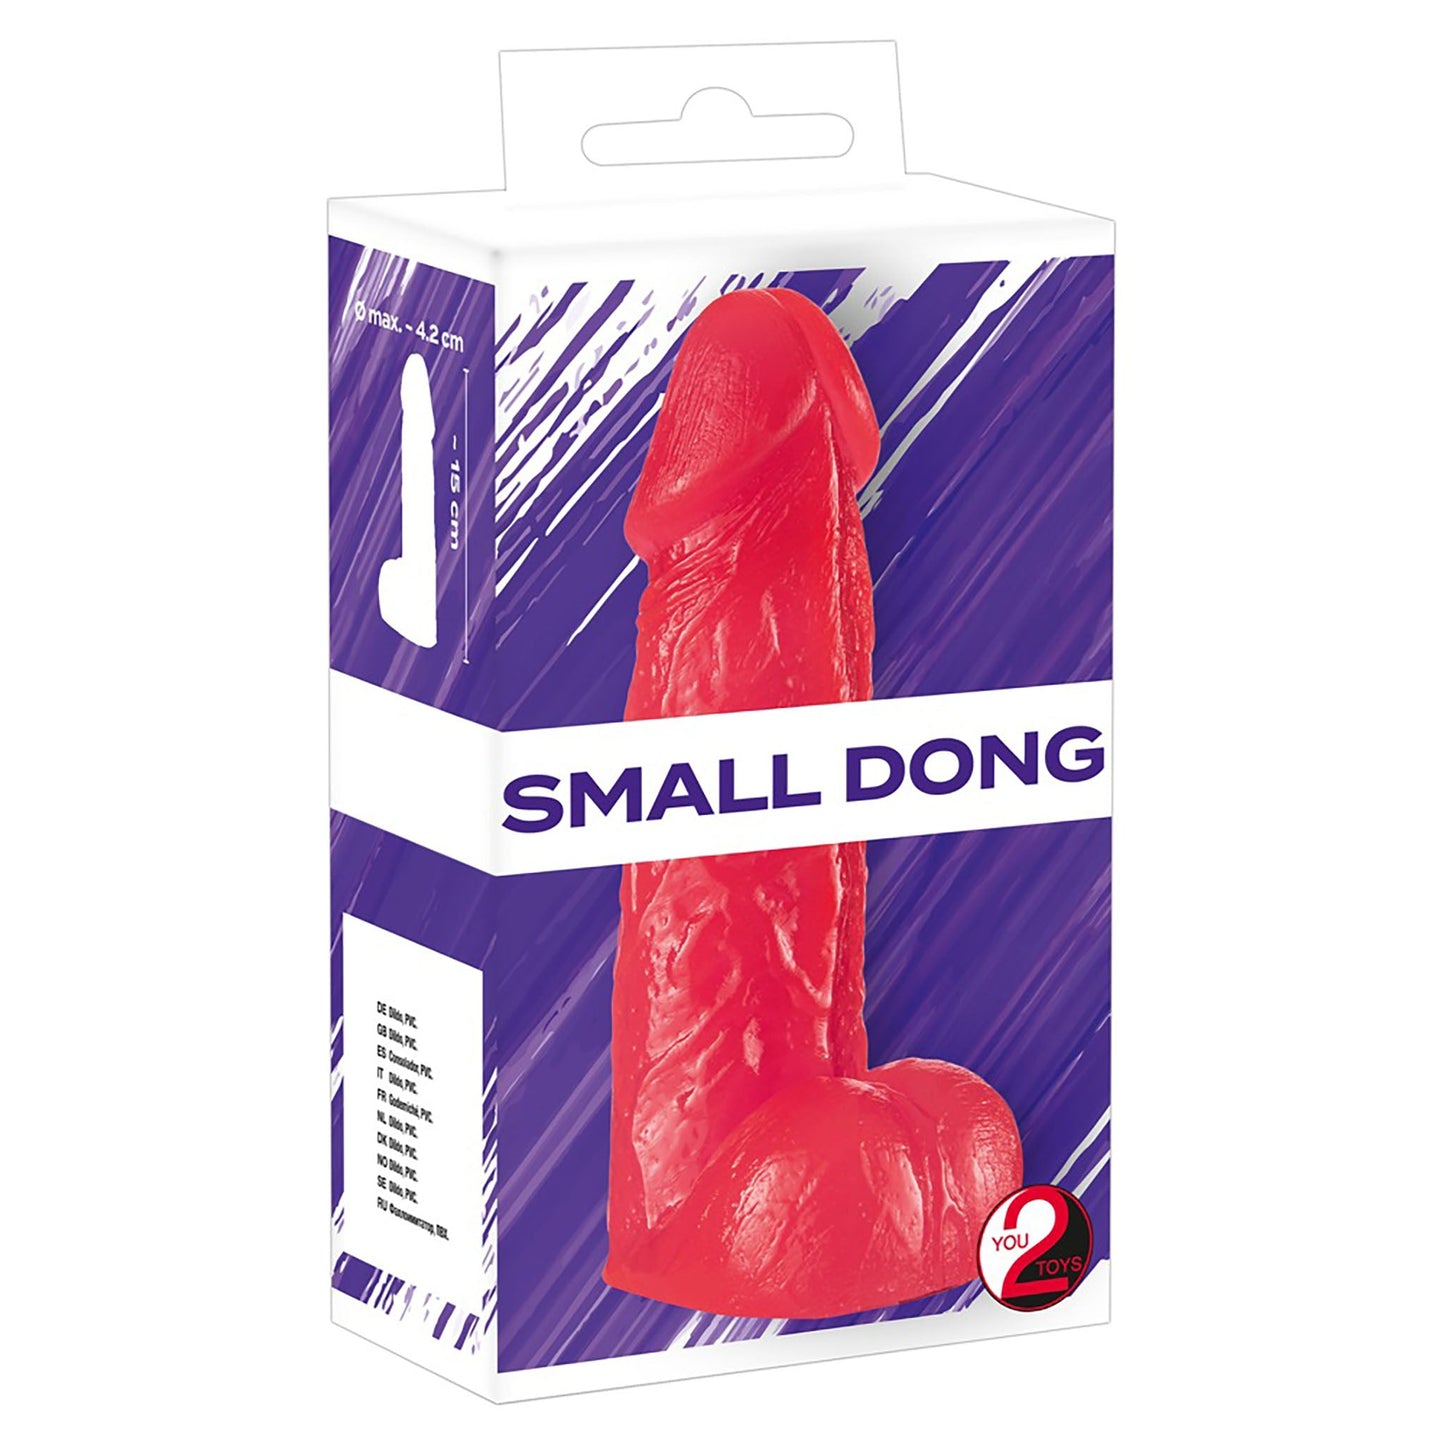 Small Dong von you 2 toys, kleiner roter Dildo in Verpackung